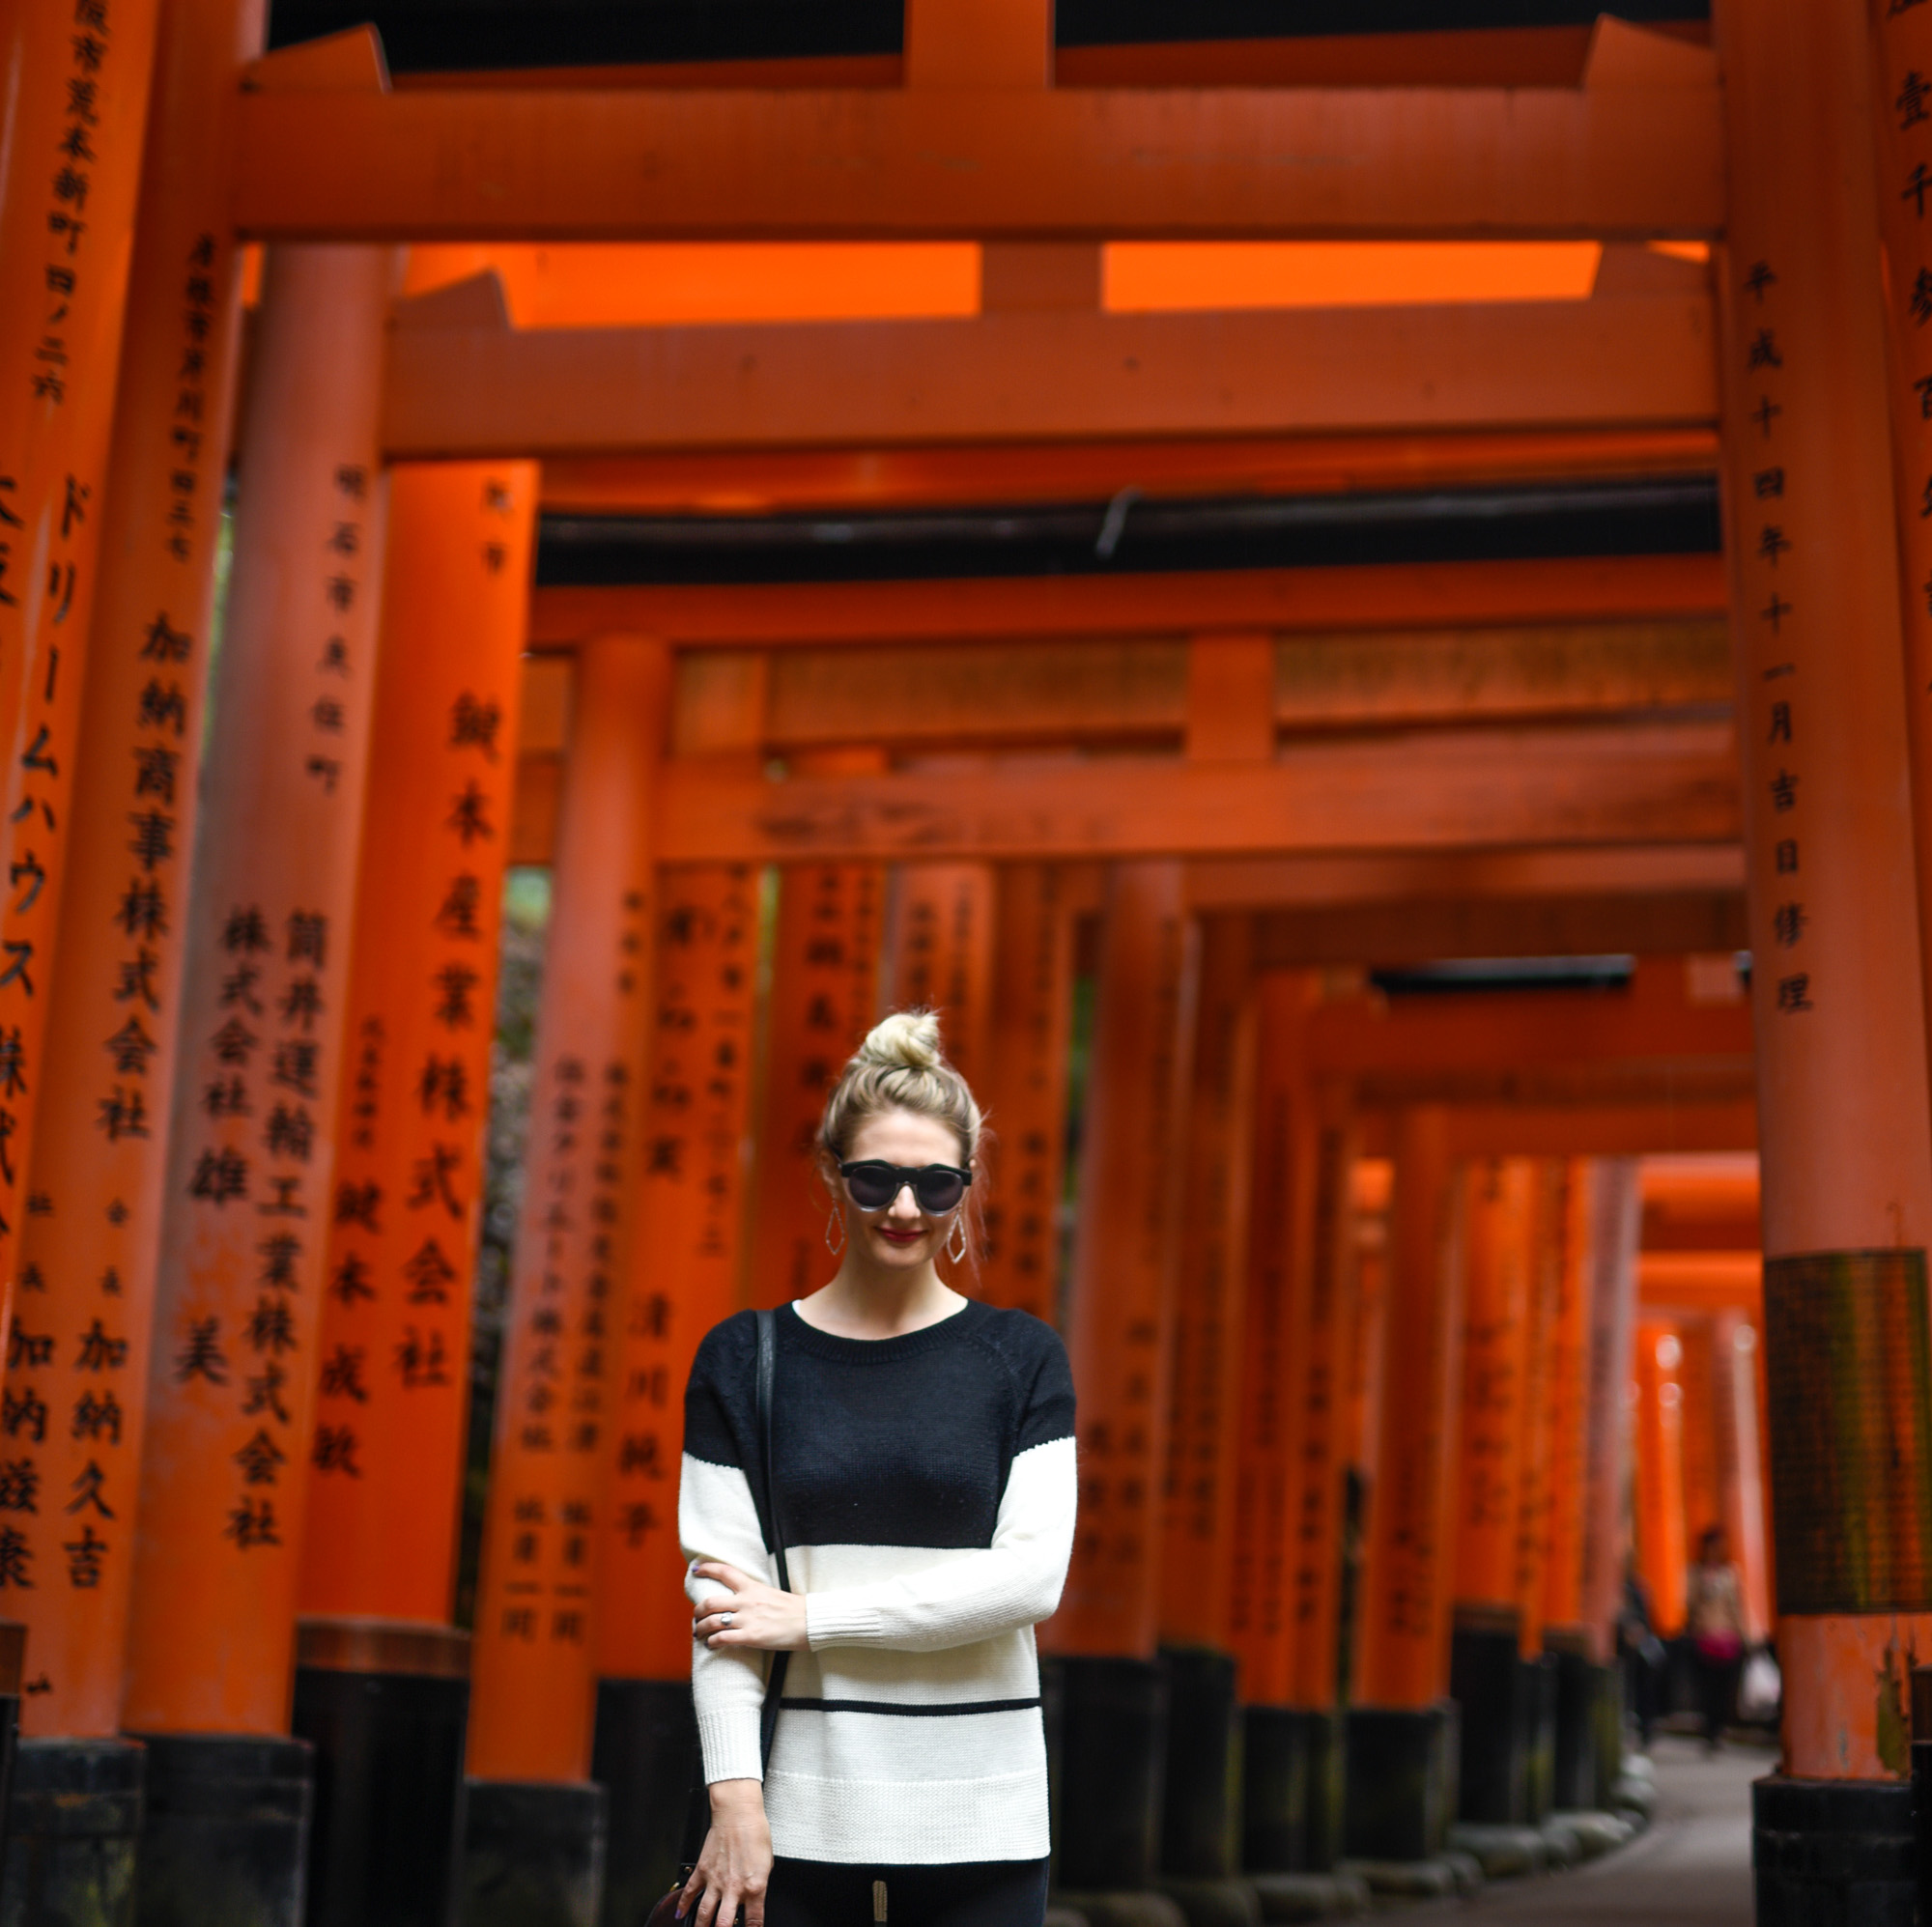 Sunset at the Fushimi Inari Temple in a colorblocked sweater.